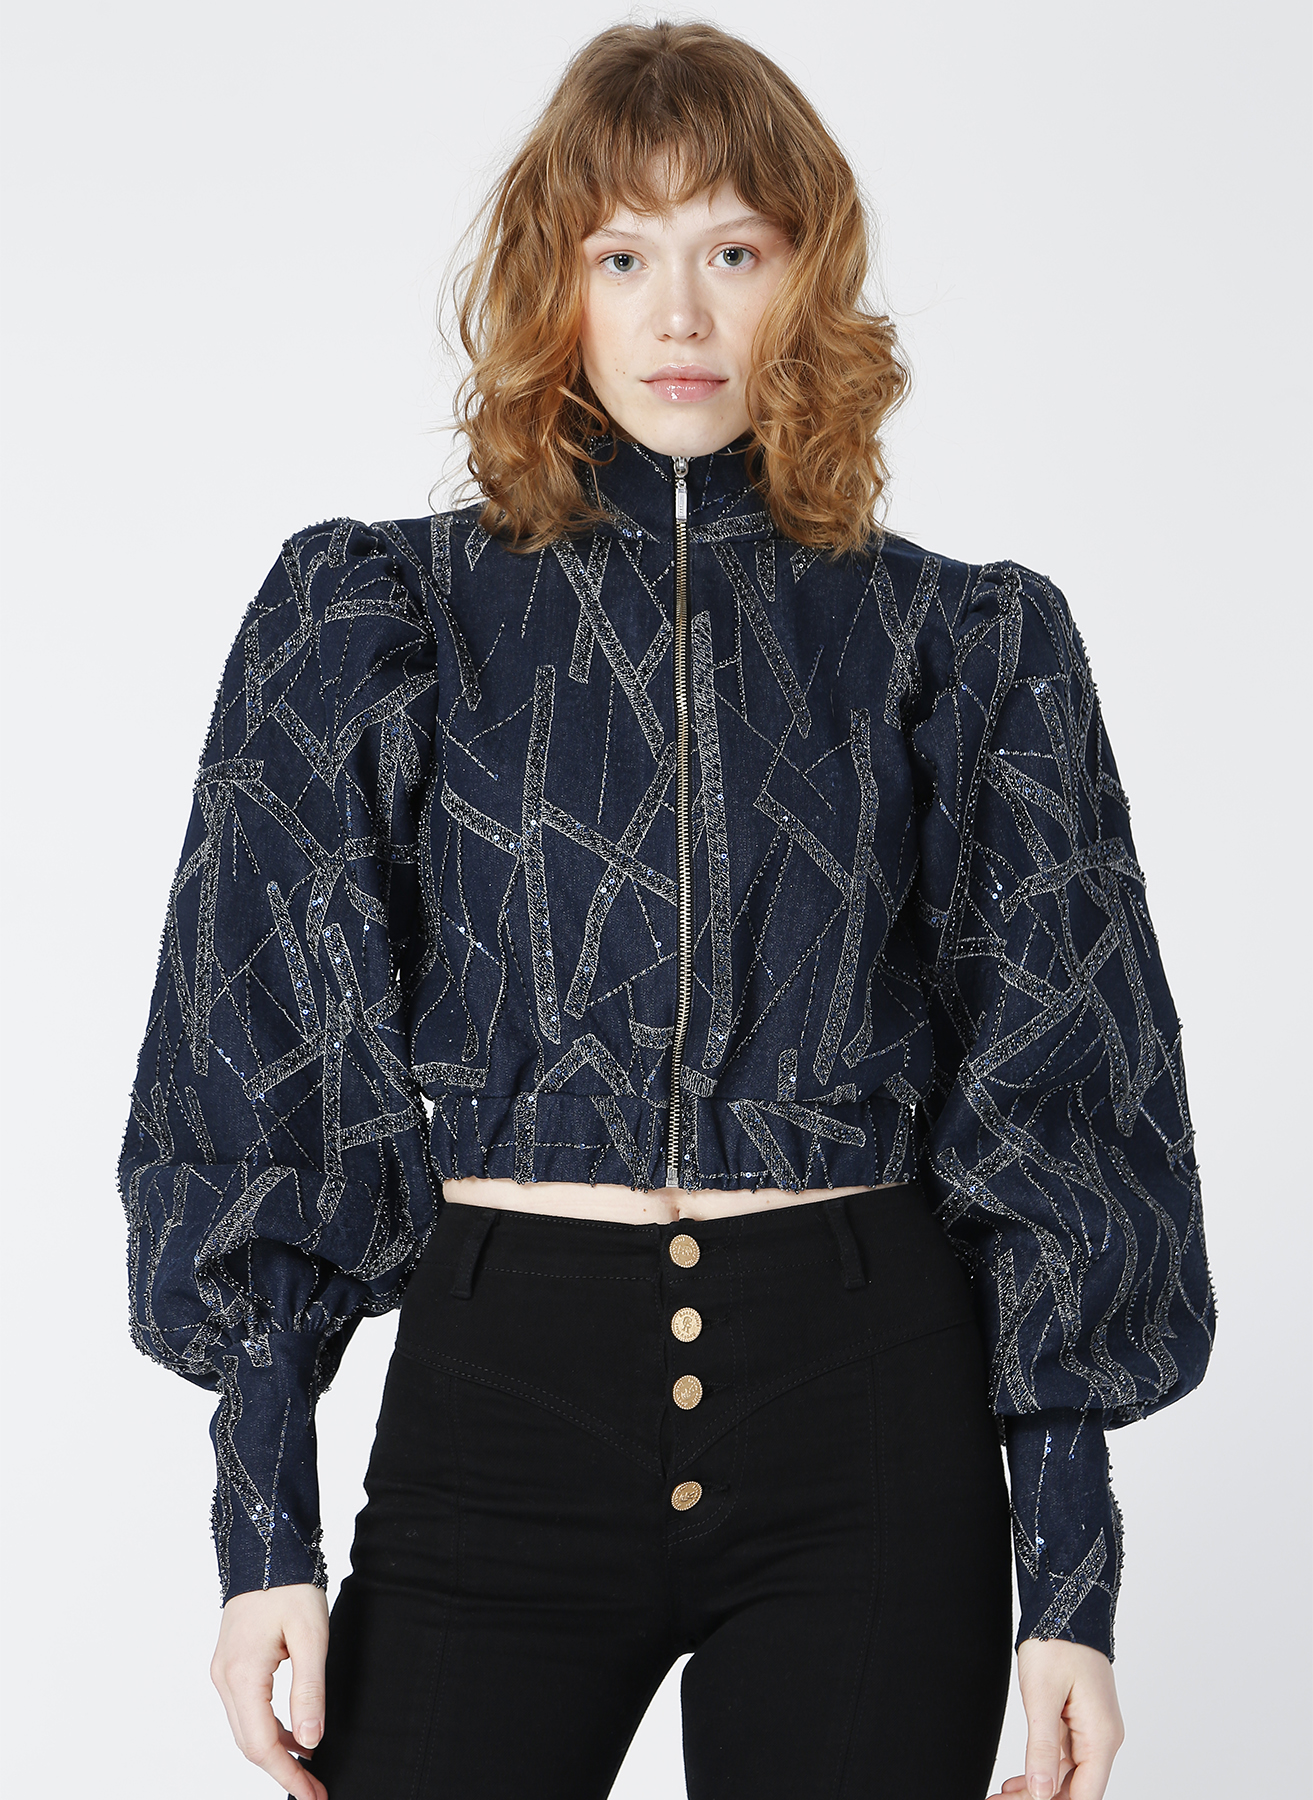 RG-600 Embroidered fabric overlay coat